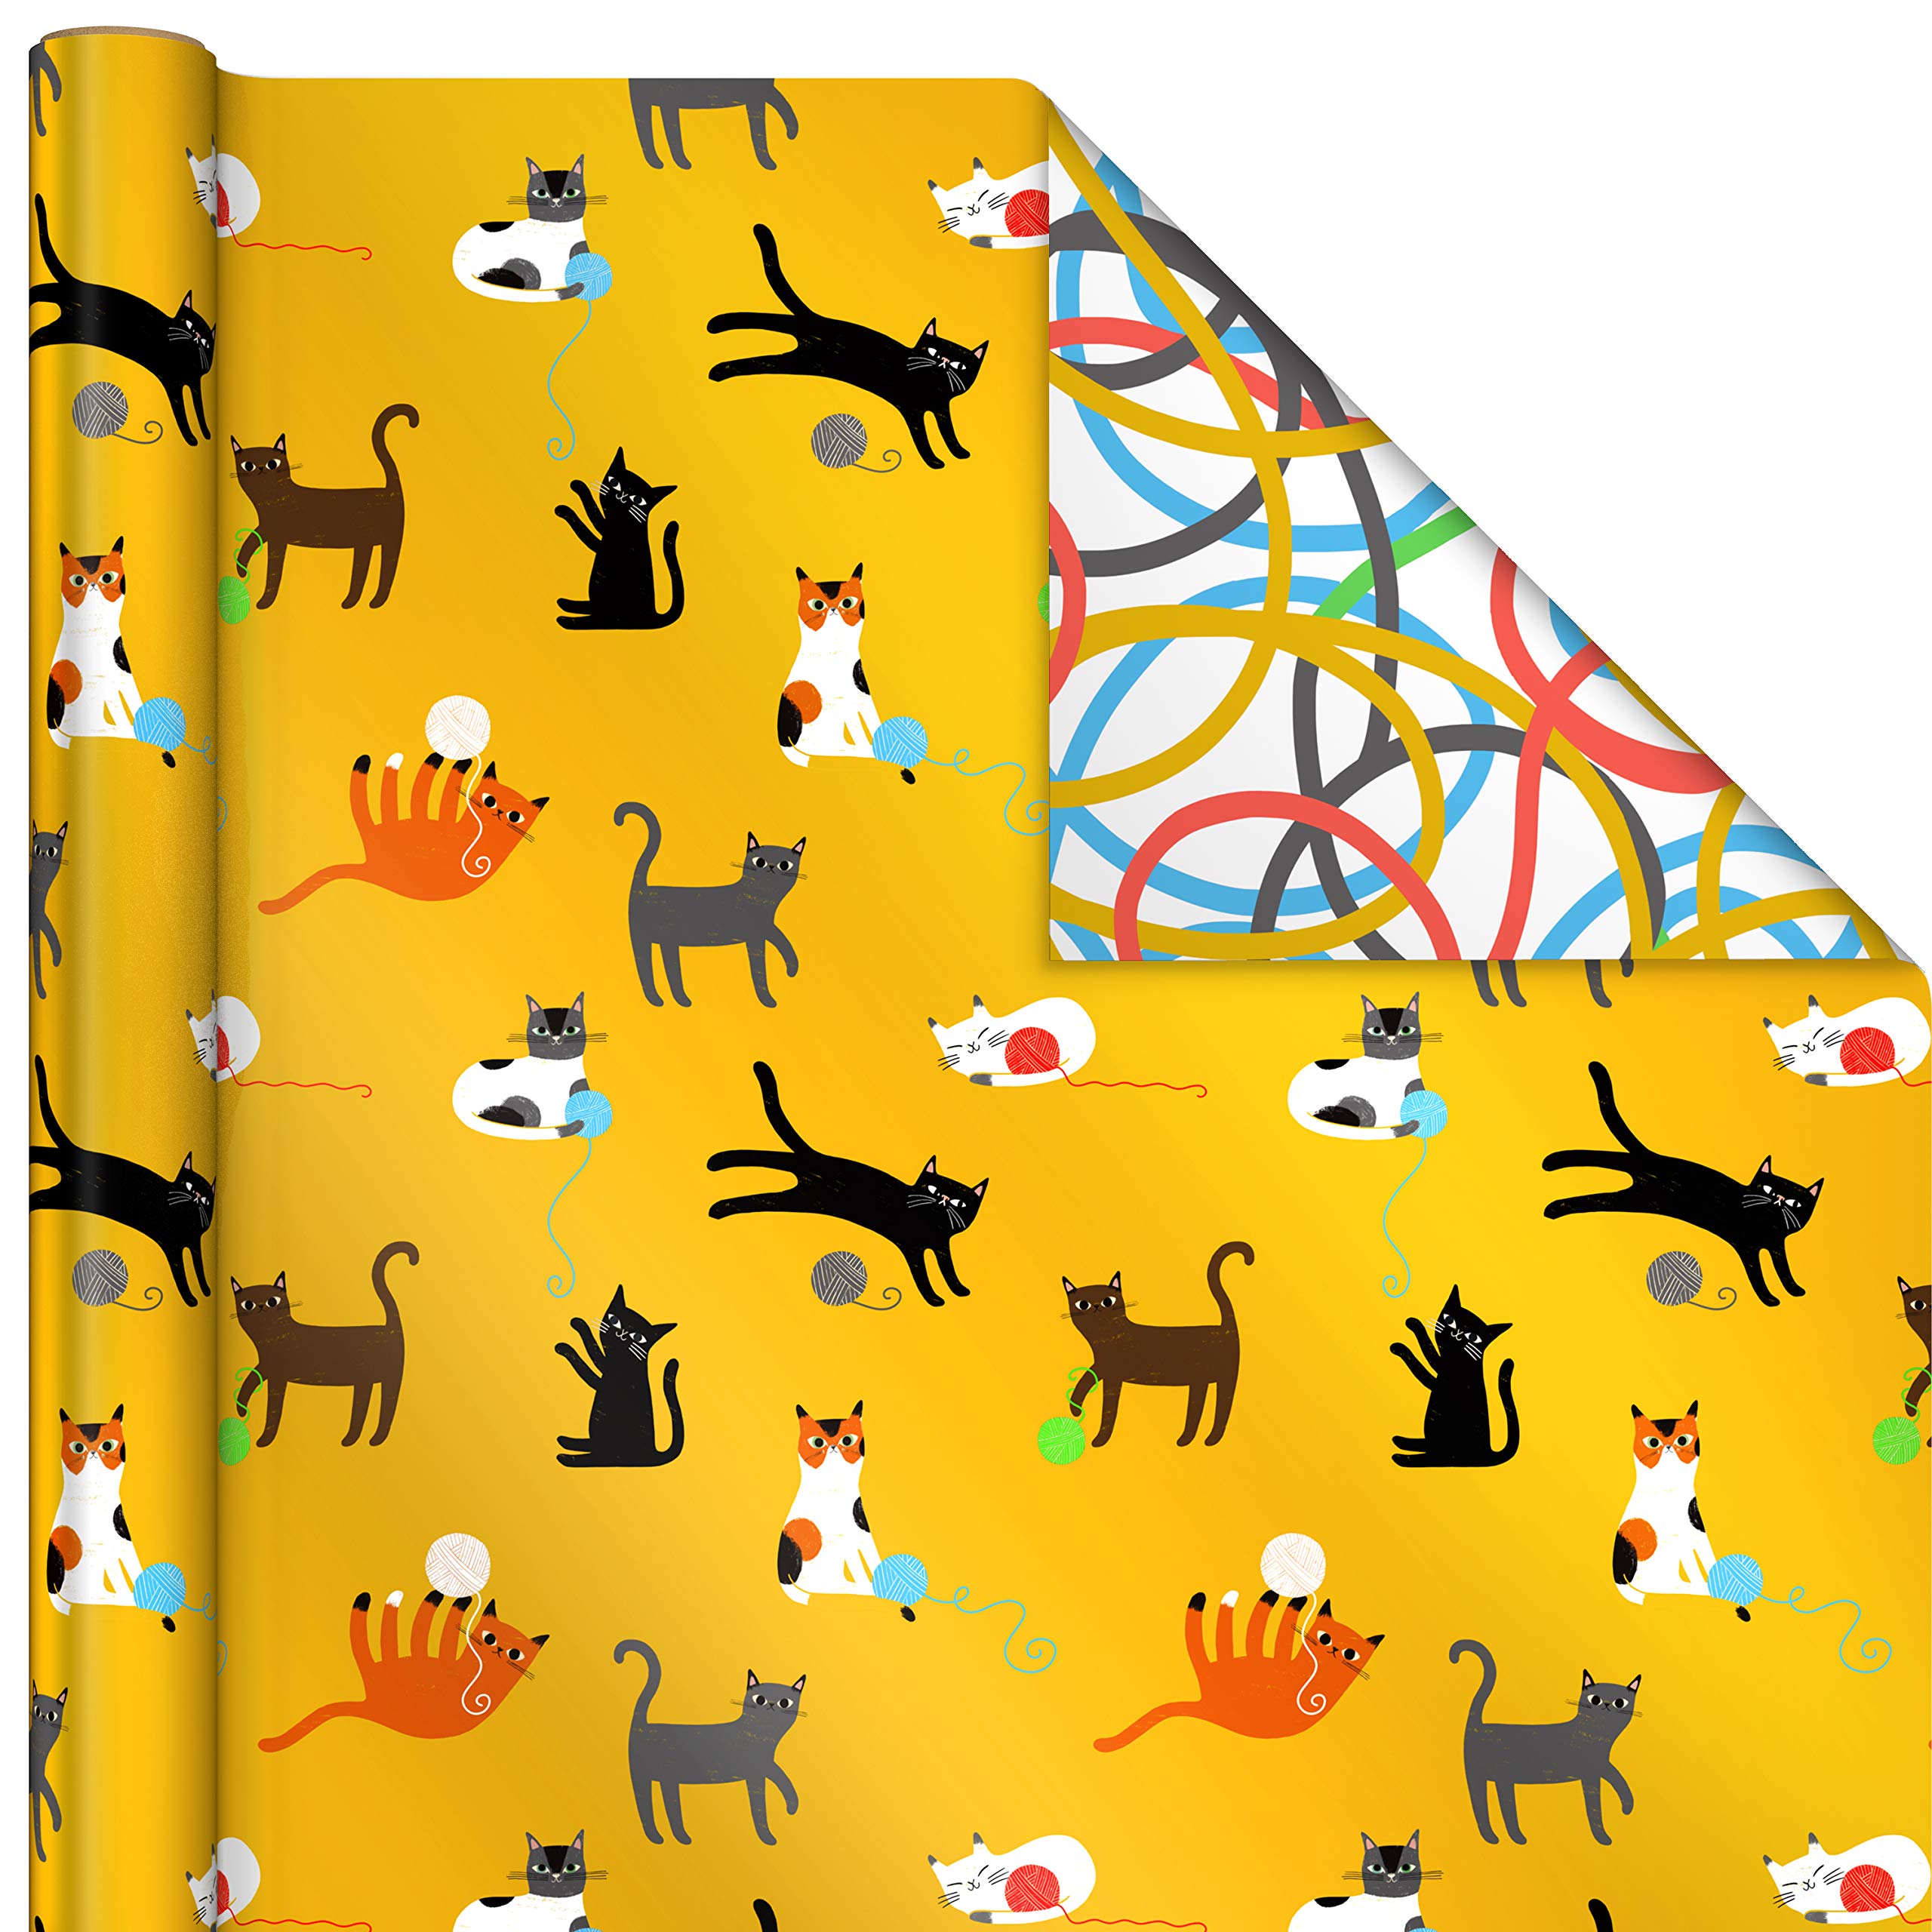 Hallmark Reversible Dog and Cat Wrapping Paper (3 Rolls: 75 sq ft ttl) Yellow, Black and White Stripes, Paw Prints, Pug, Yorkie, Hound for Birthdays, Baby Showers, Christmas, New Pet, Back to School